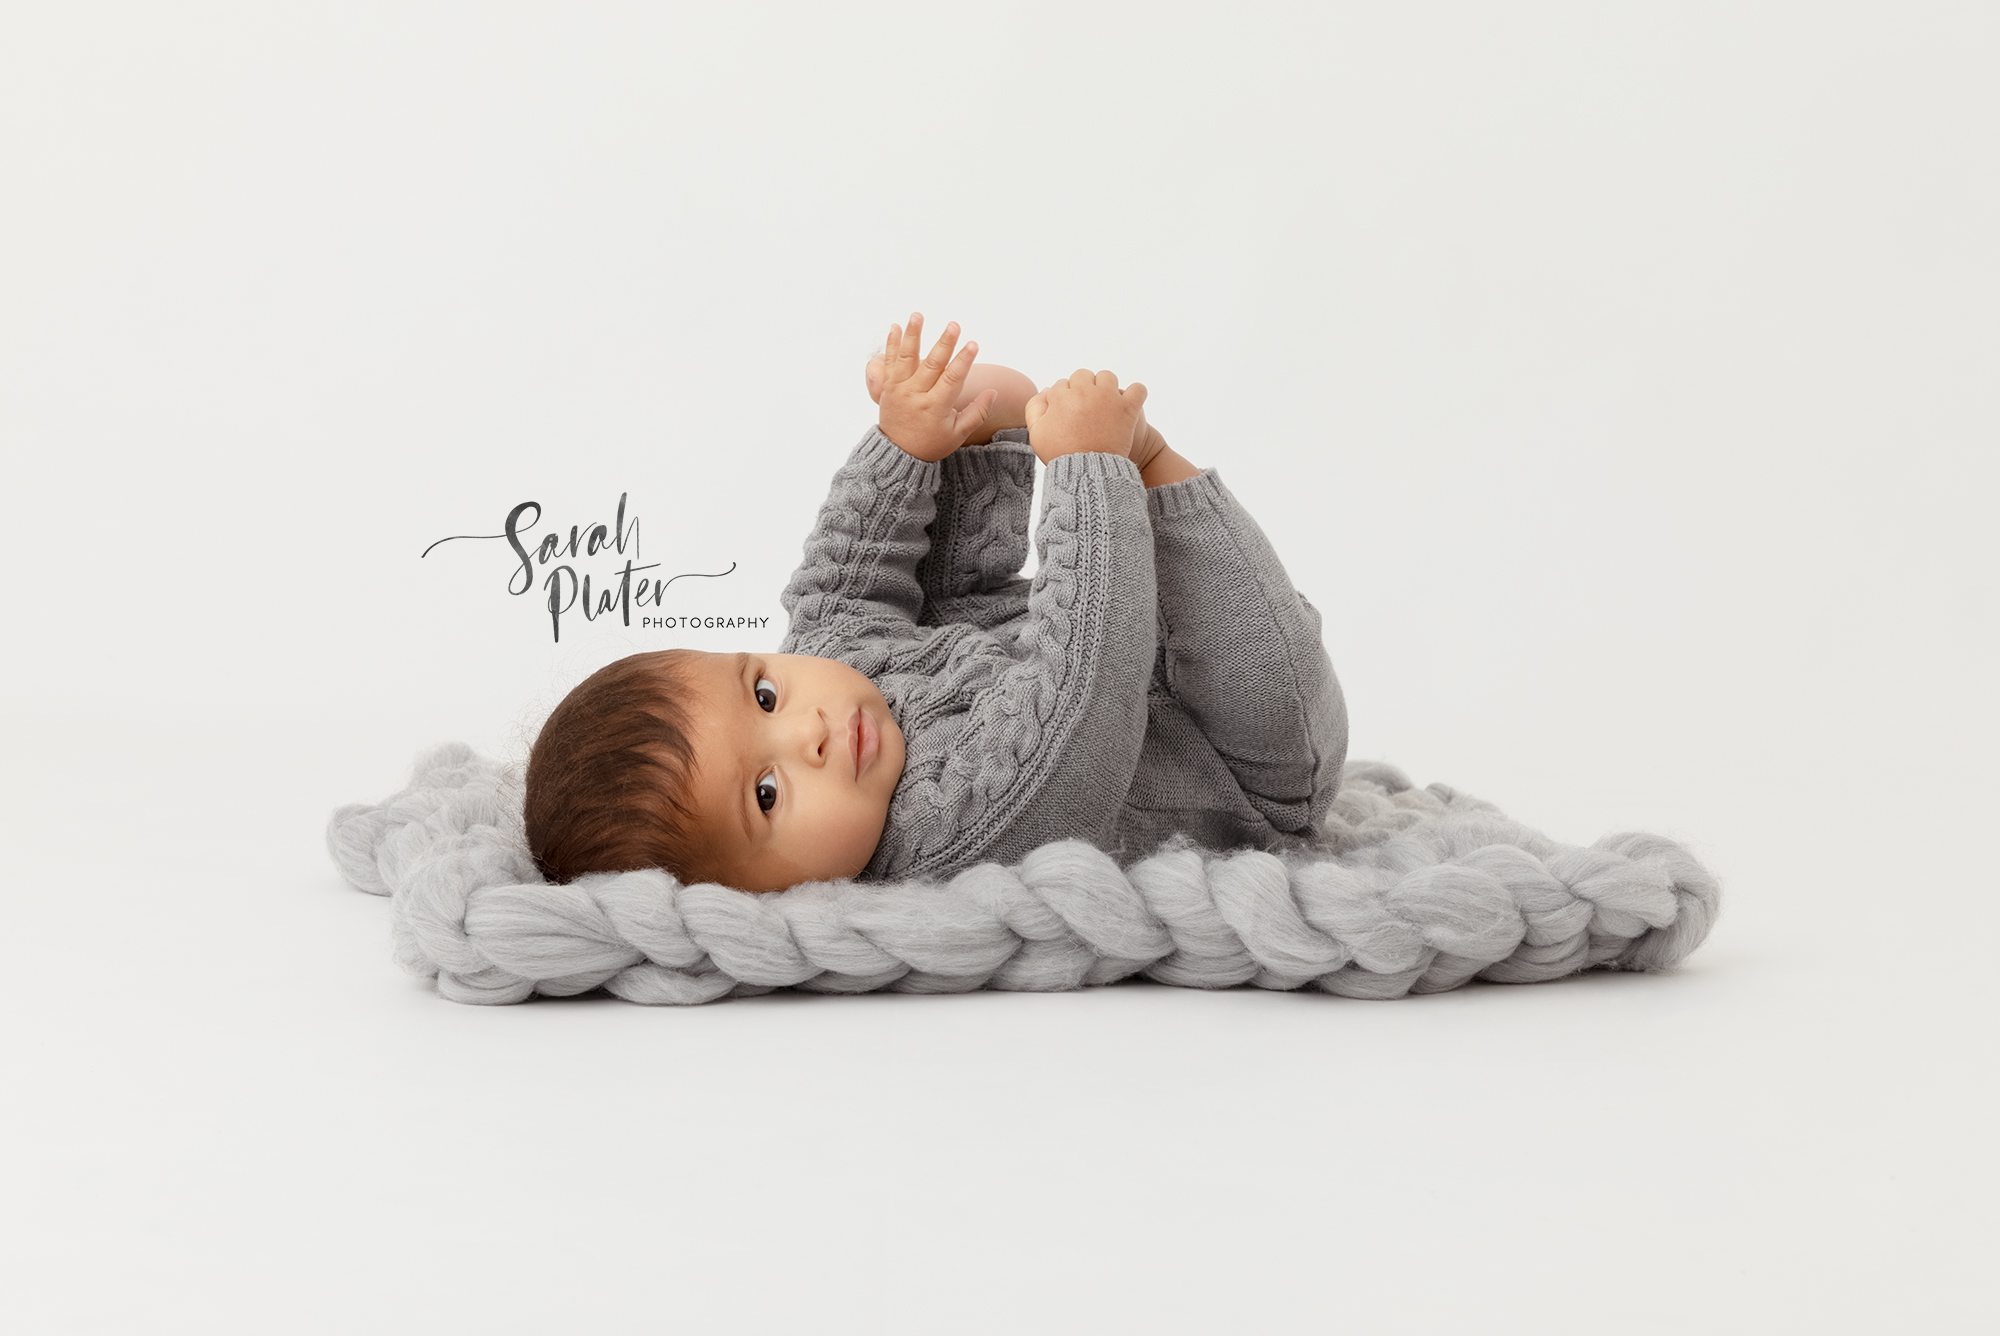 Monthly Baby Photoshoot Ideas: Capture Adorable Moments